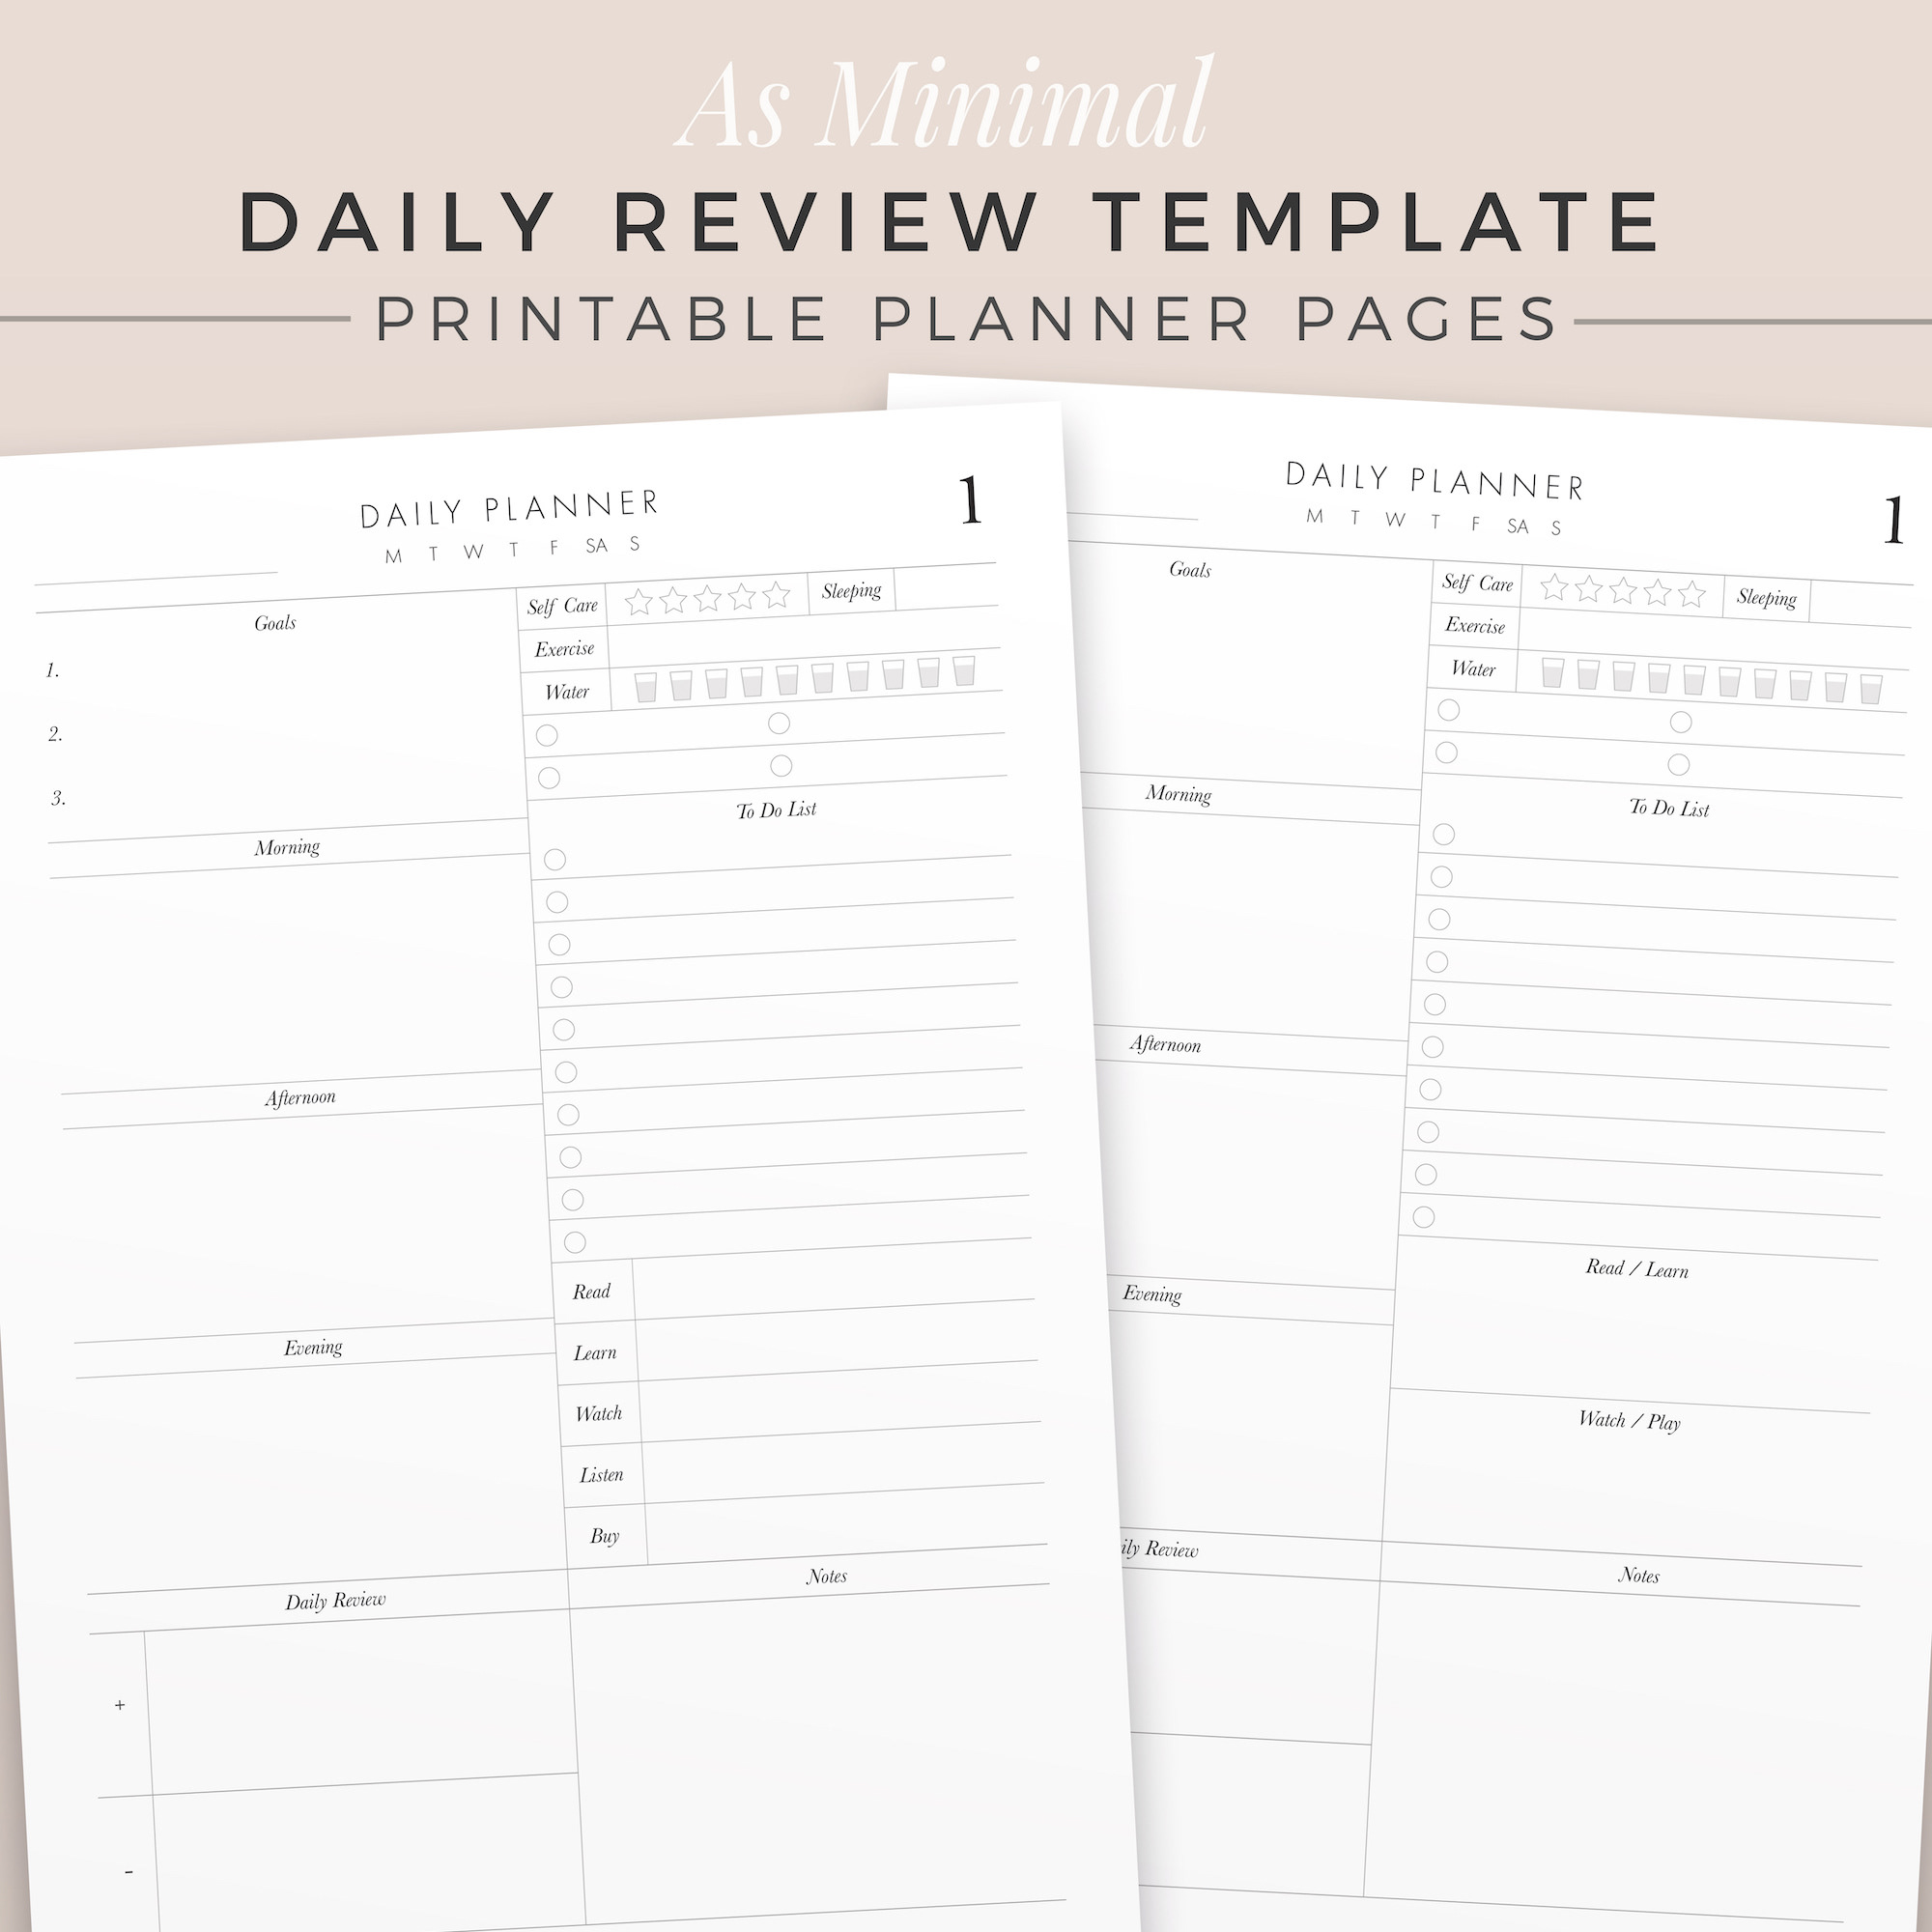 Paperly Planners - Beautiful, Productive. - AS MINIMAL Daily Review